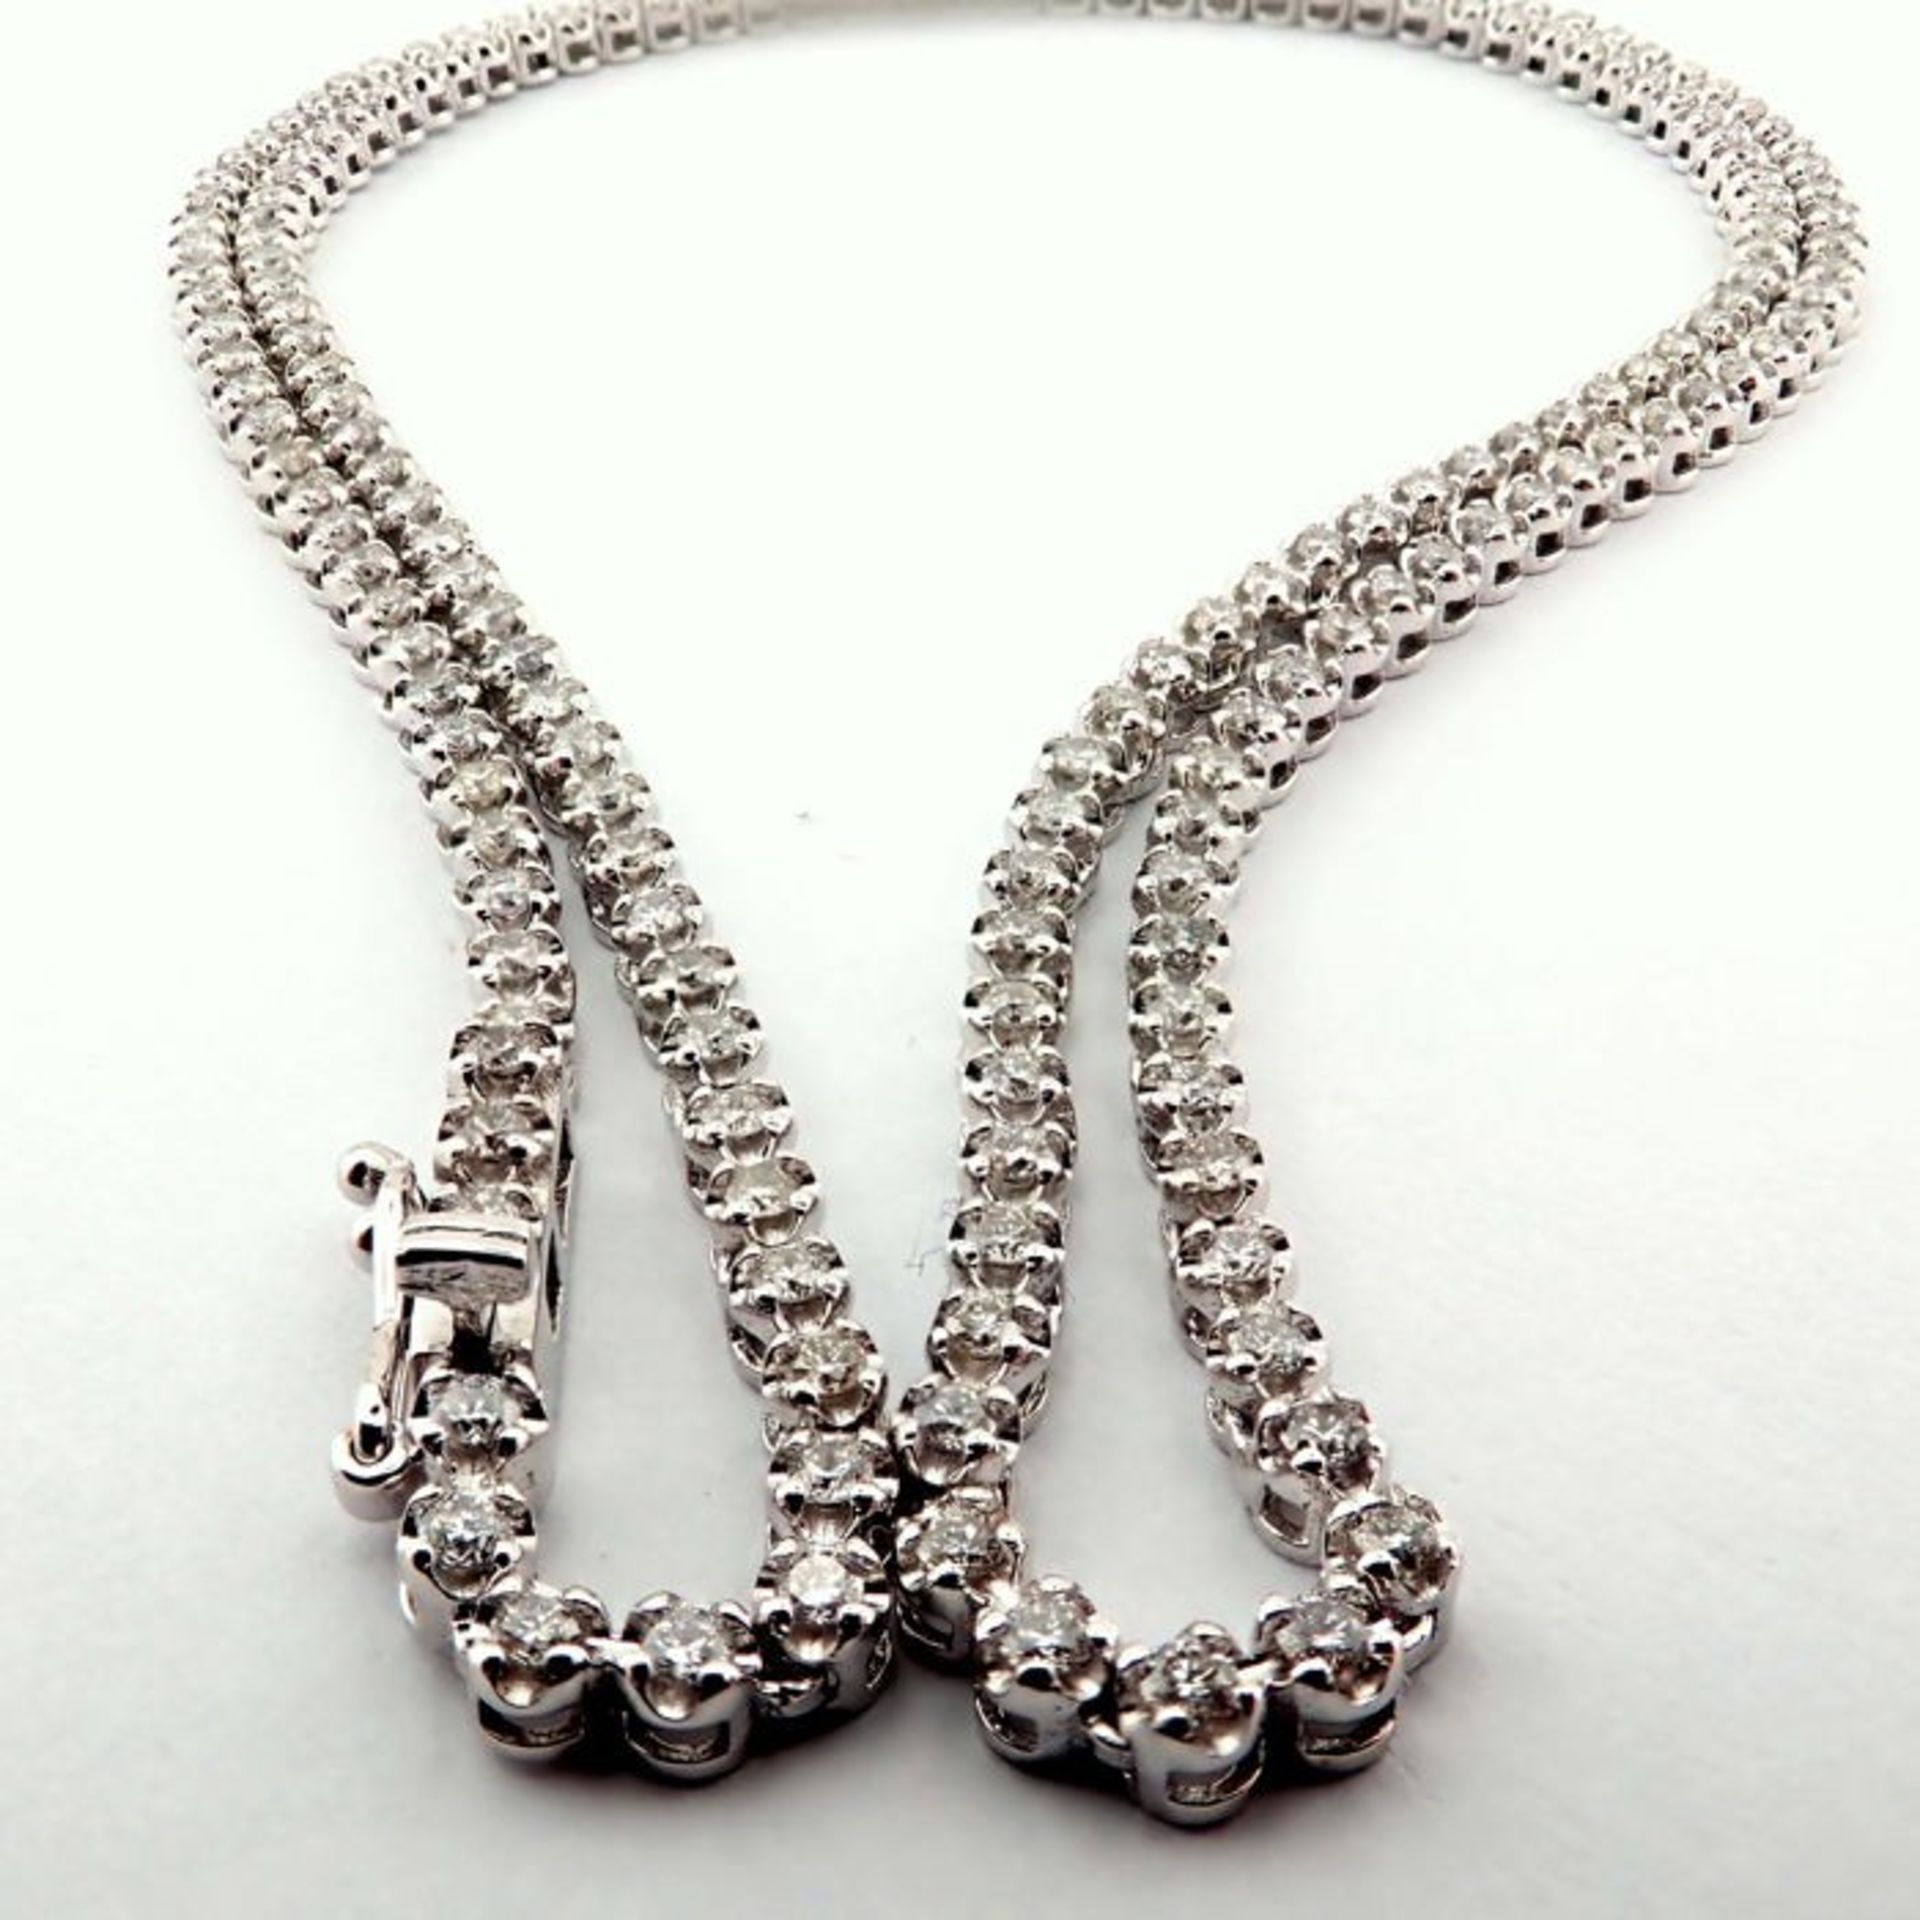 Certificated 14K White Gold Diamond Necklace - Image 4 of 7